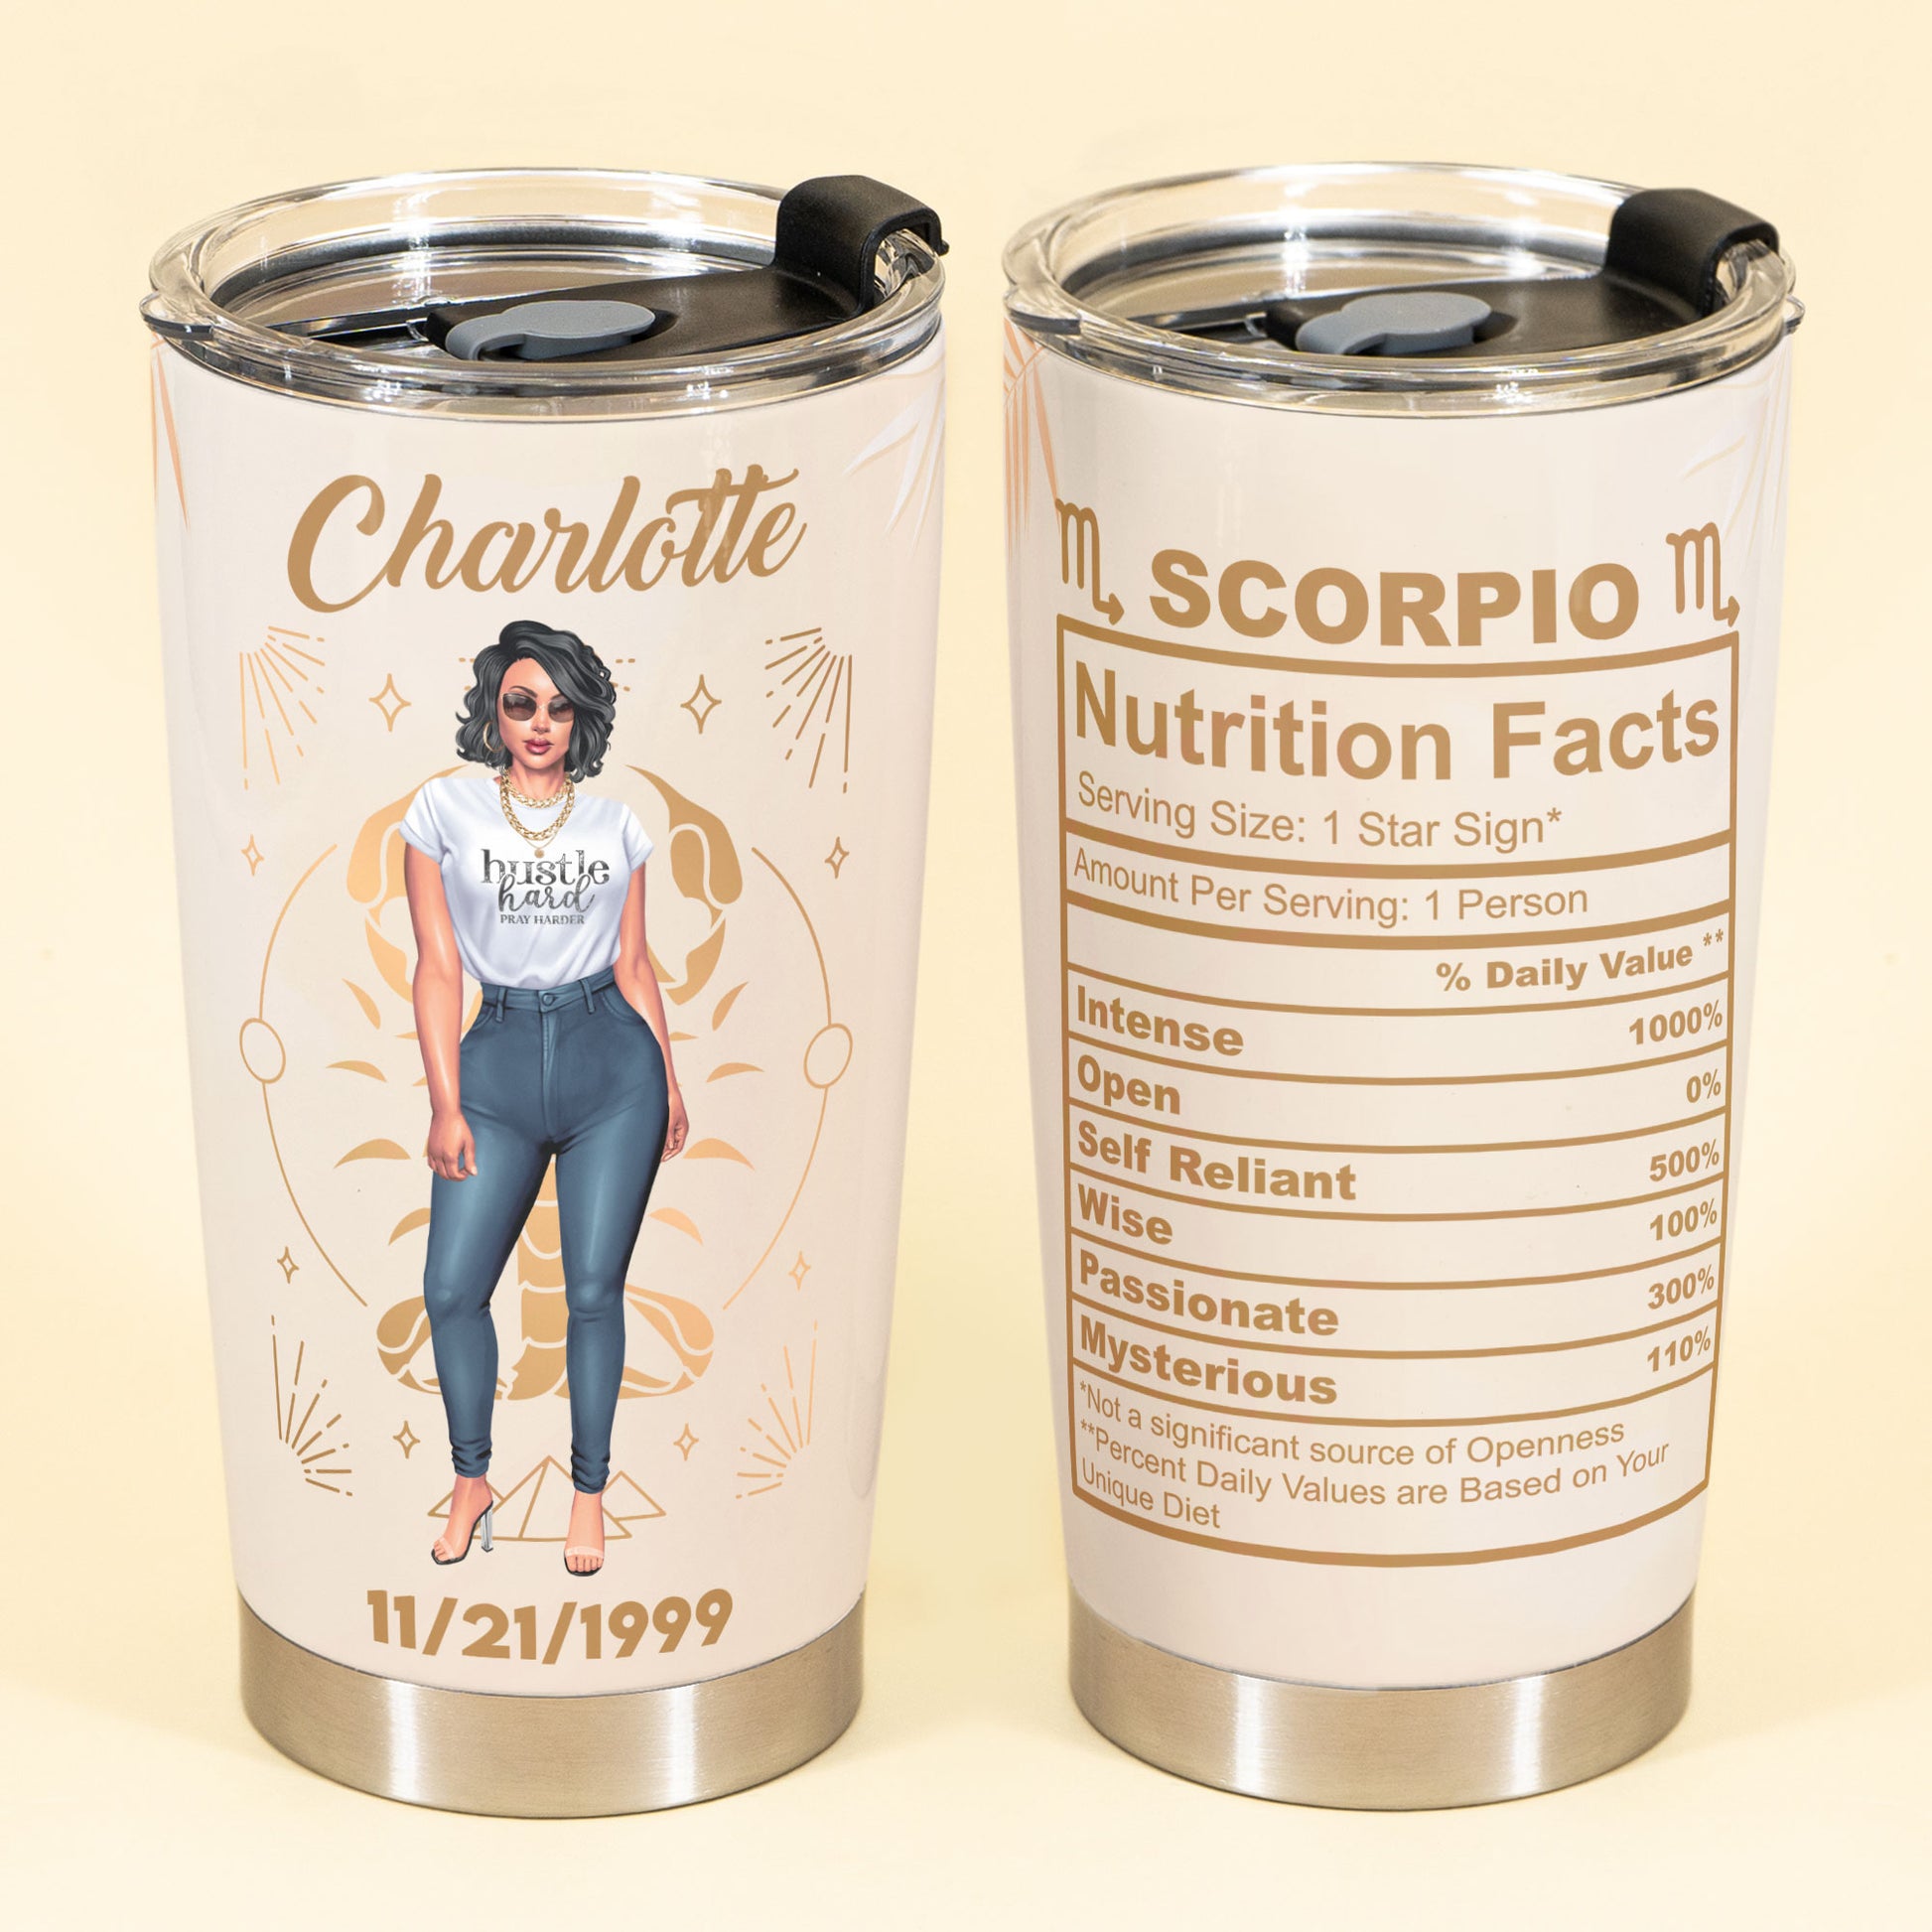 Zodiac Nutrition Facts Ver 2 - Personalized Tumbler Cup - Birthday Gift For Girl, Friend, Astrology Lover